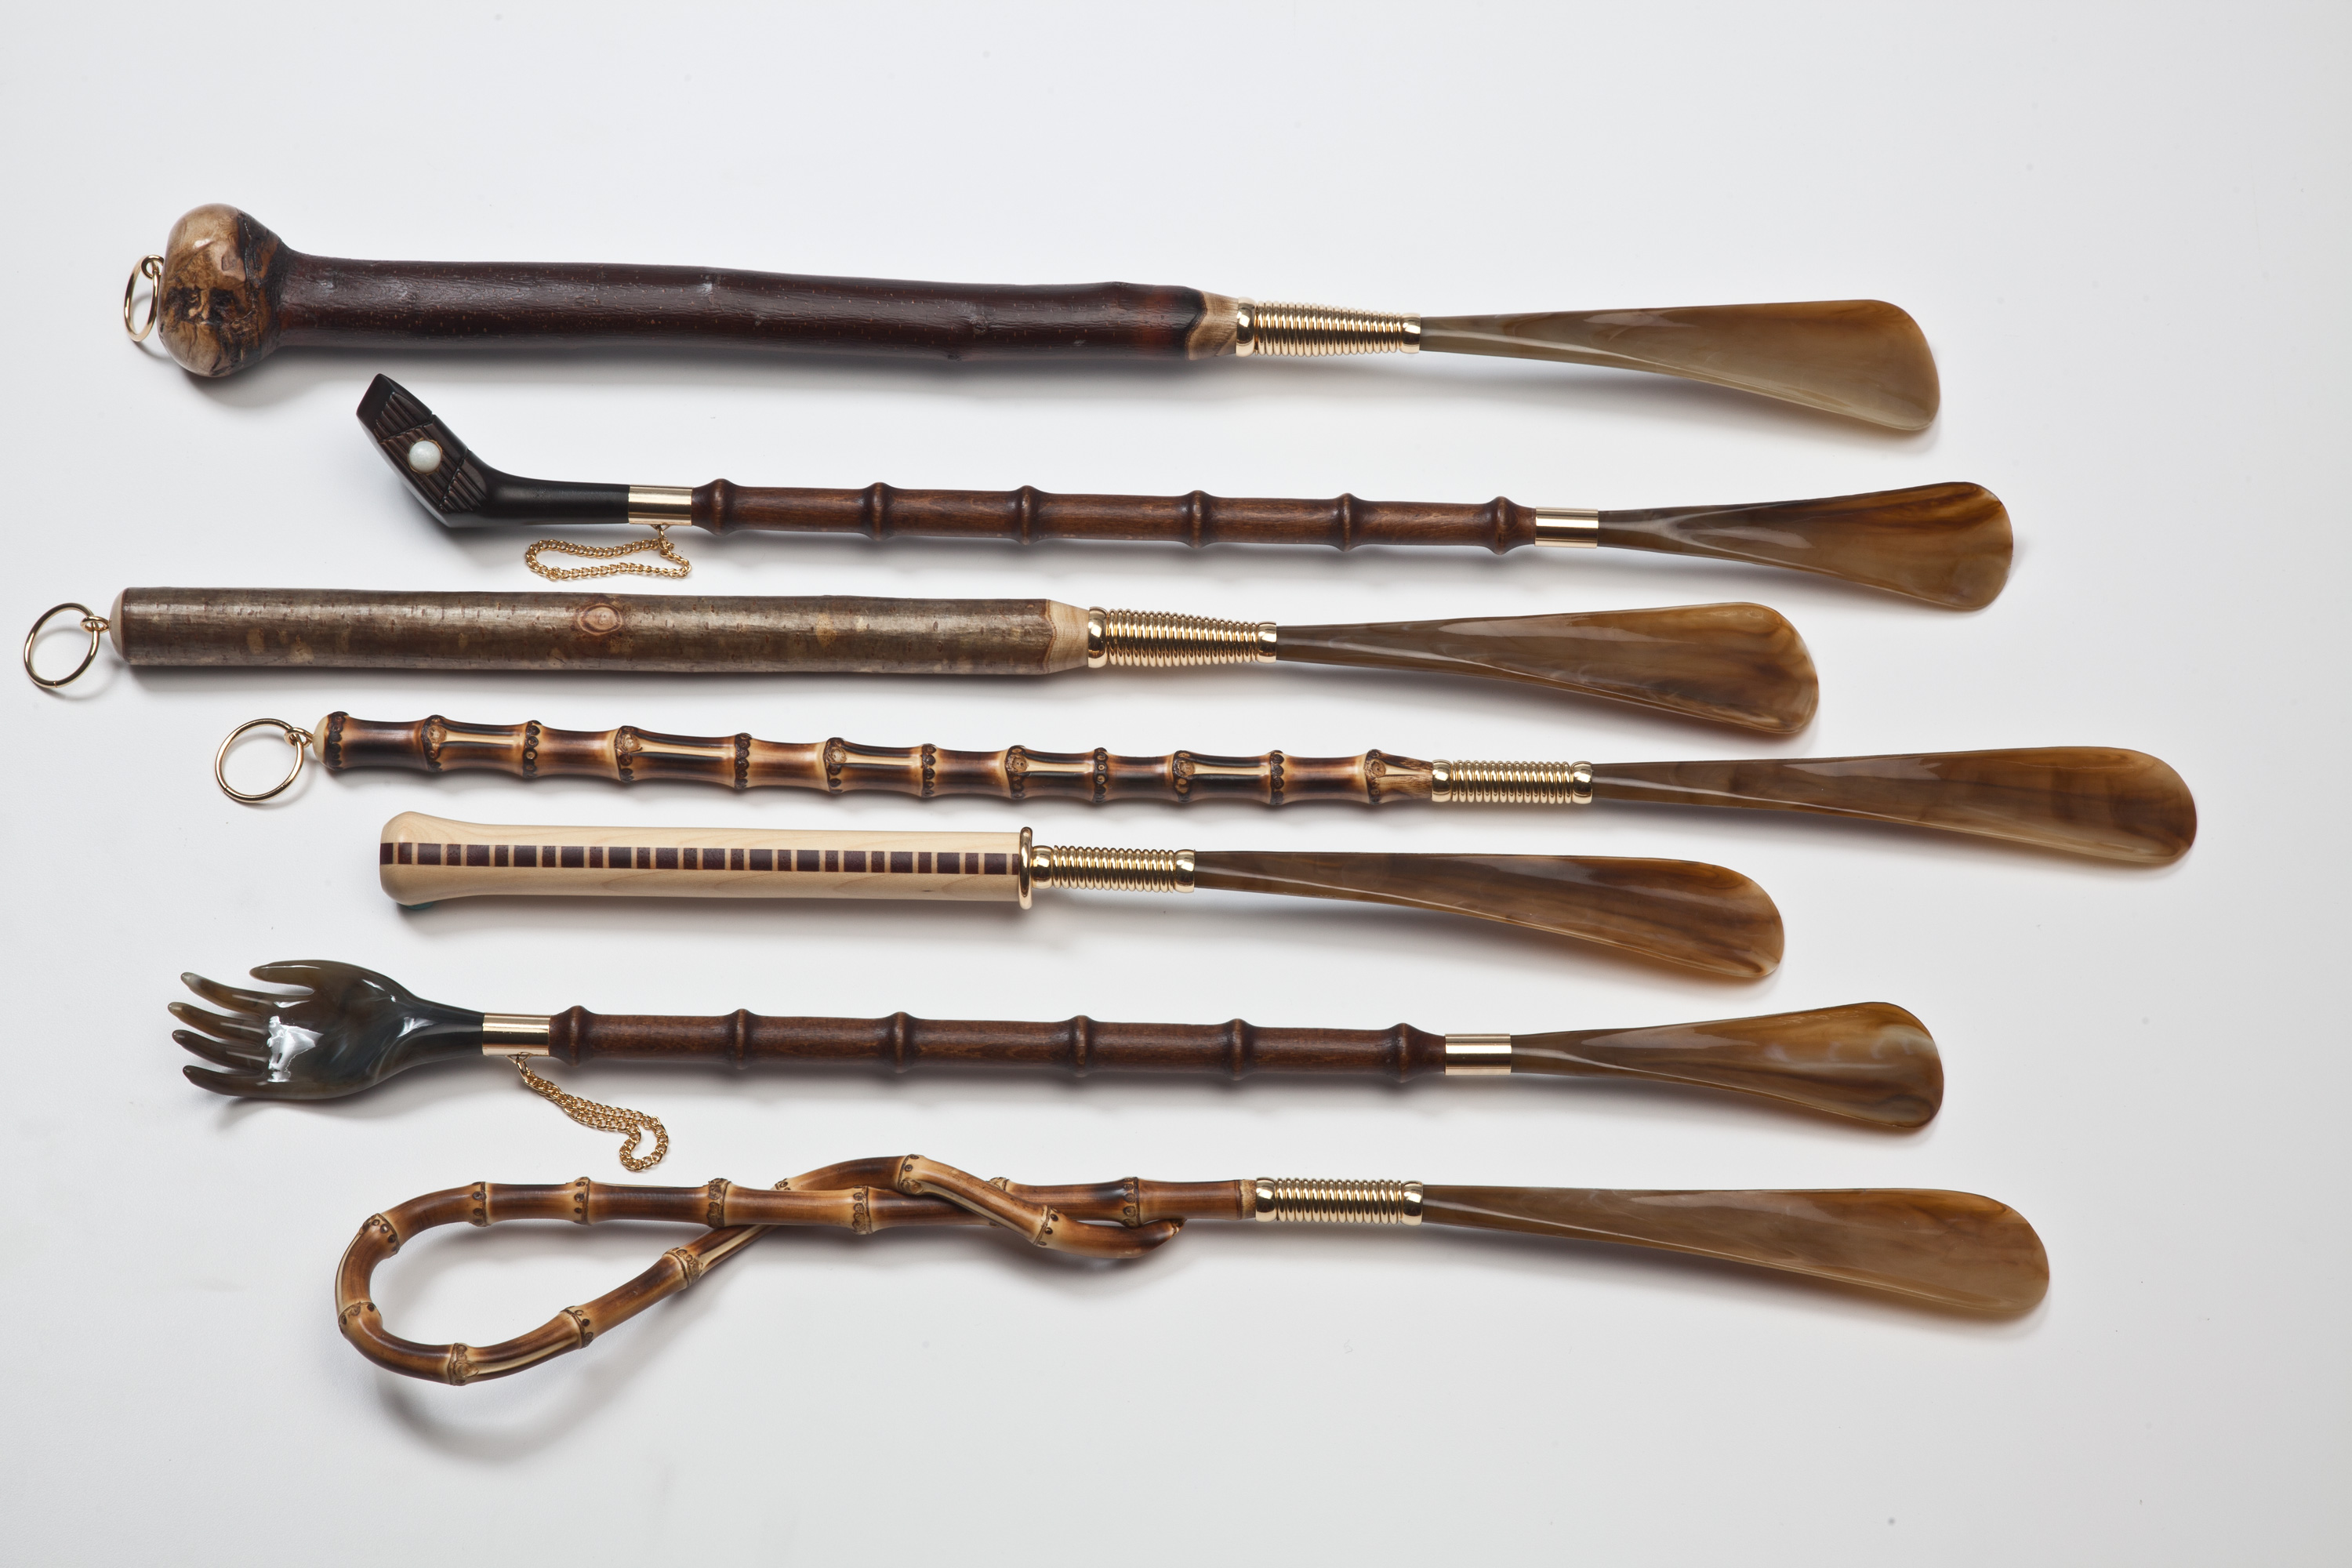 Some of our new shoehorns from Italy. All handmade with exotic wooden shafts.